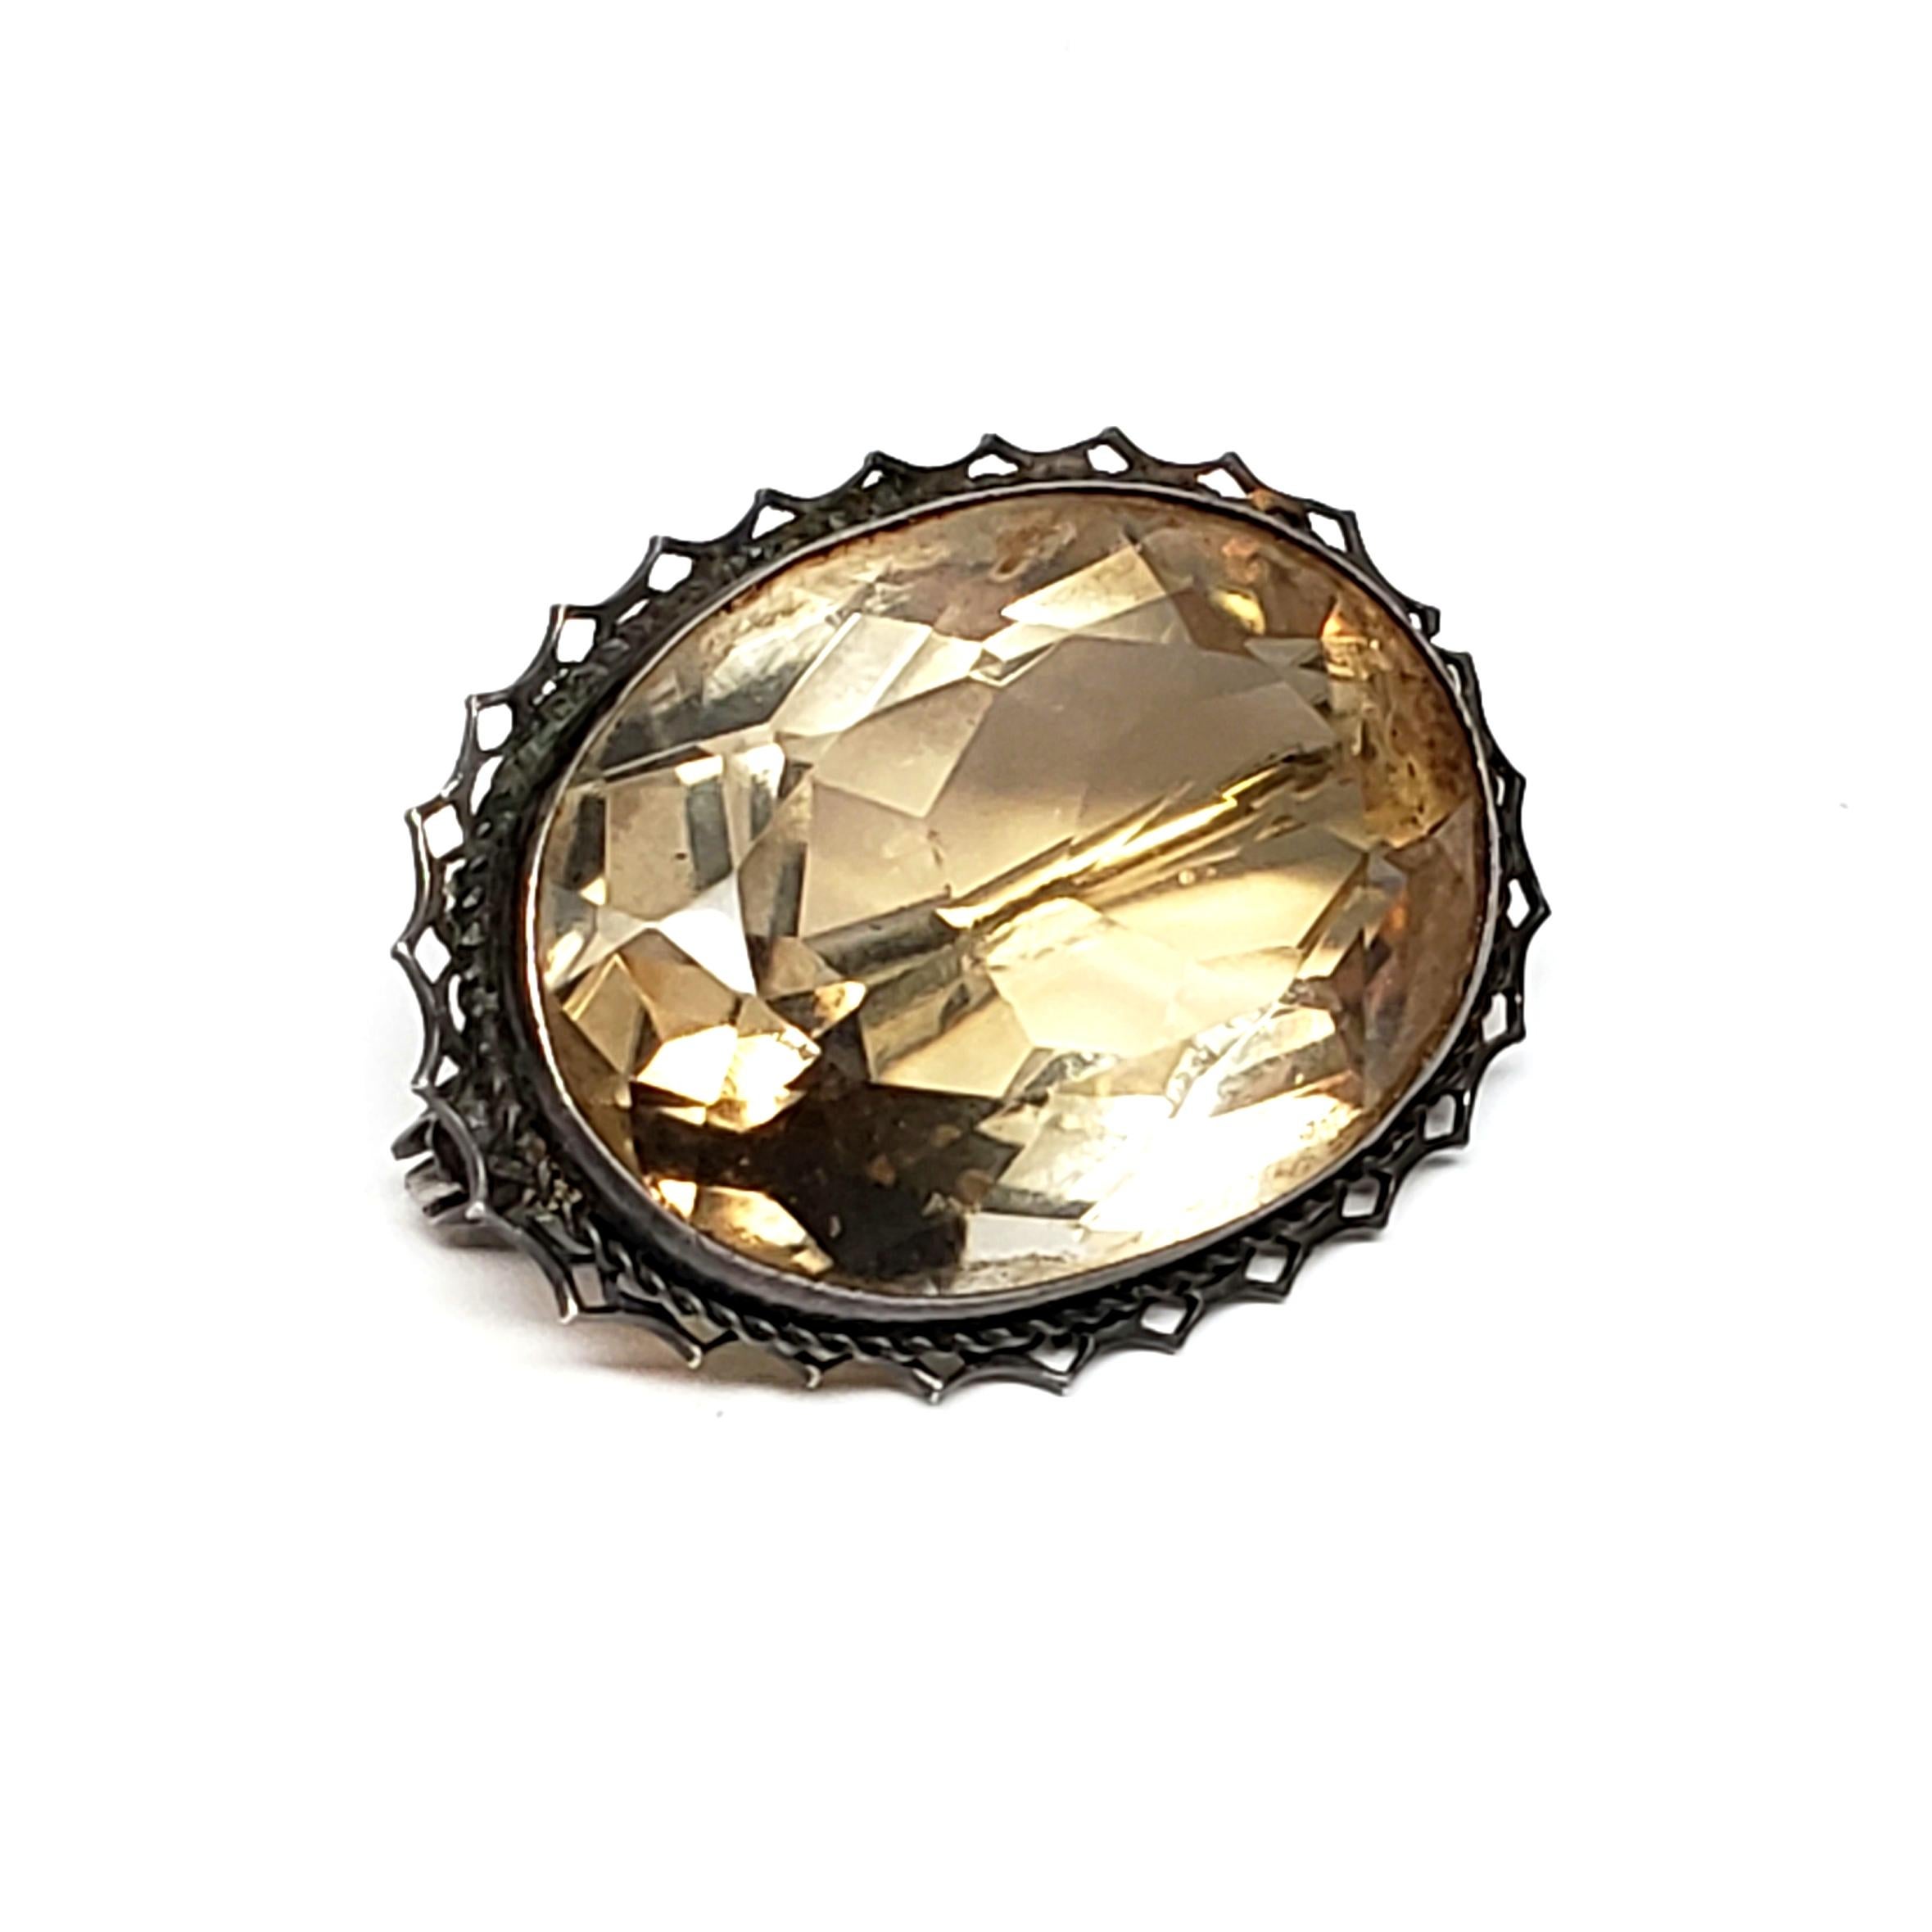 Sterling silver and citrine pin made in Germany.

Beautifully simple and elegant pin features a large oval faceted citrine bezel set in a delicate frame.

Measures 1 1/8